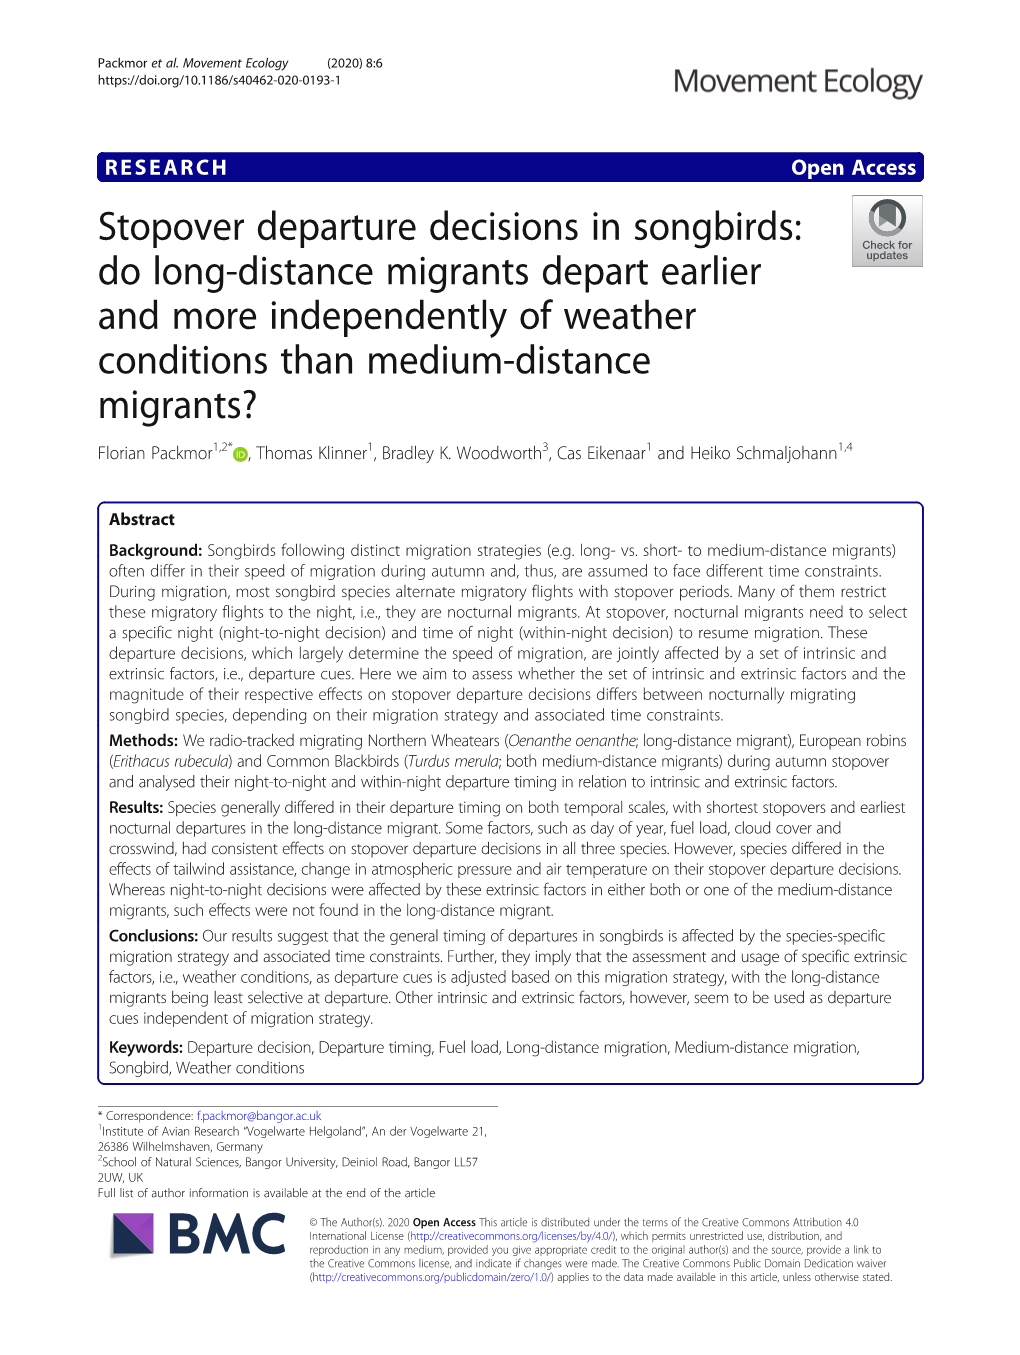 Stopover Departure Decisions in Songbirds: Do Long-Distance Migrants Depart Earlier and More Independently of Weather Conditions